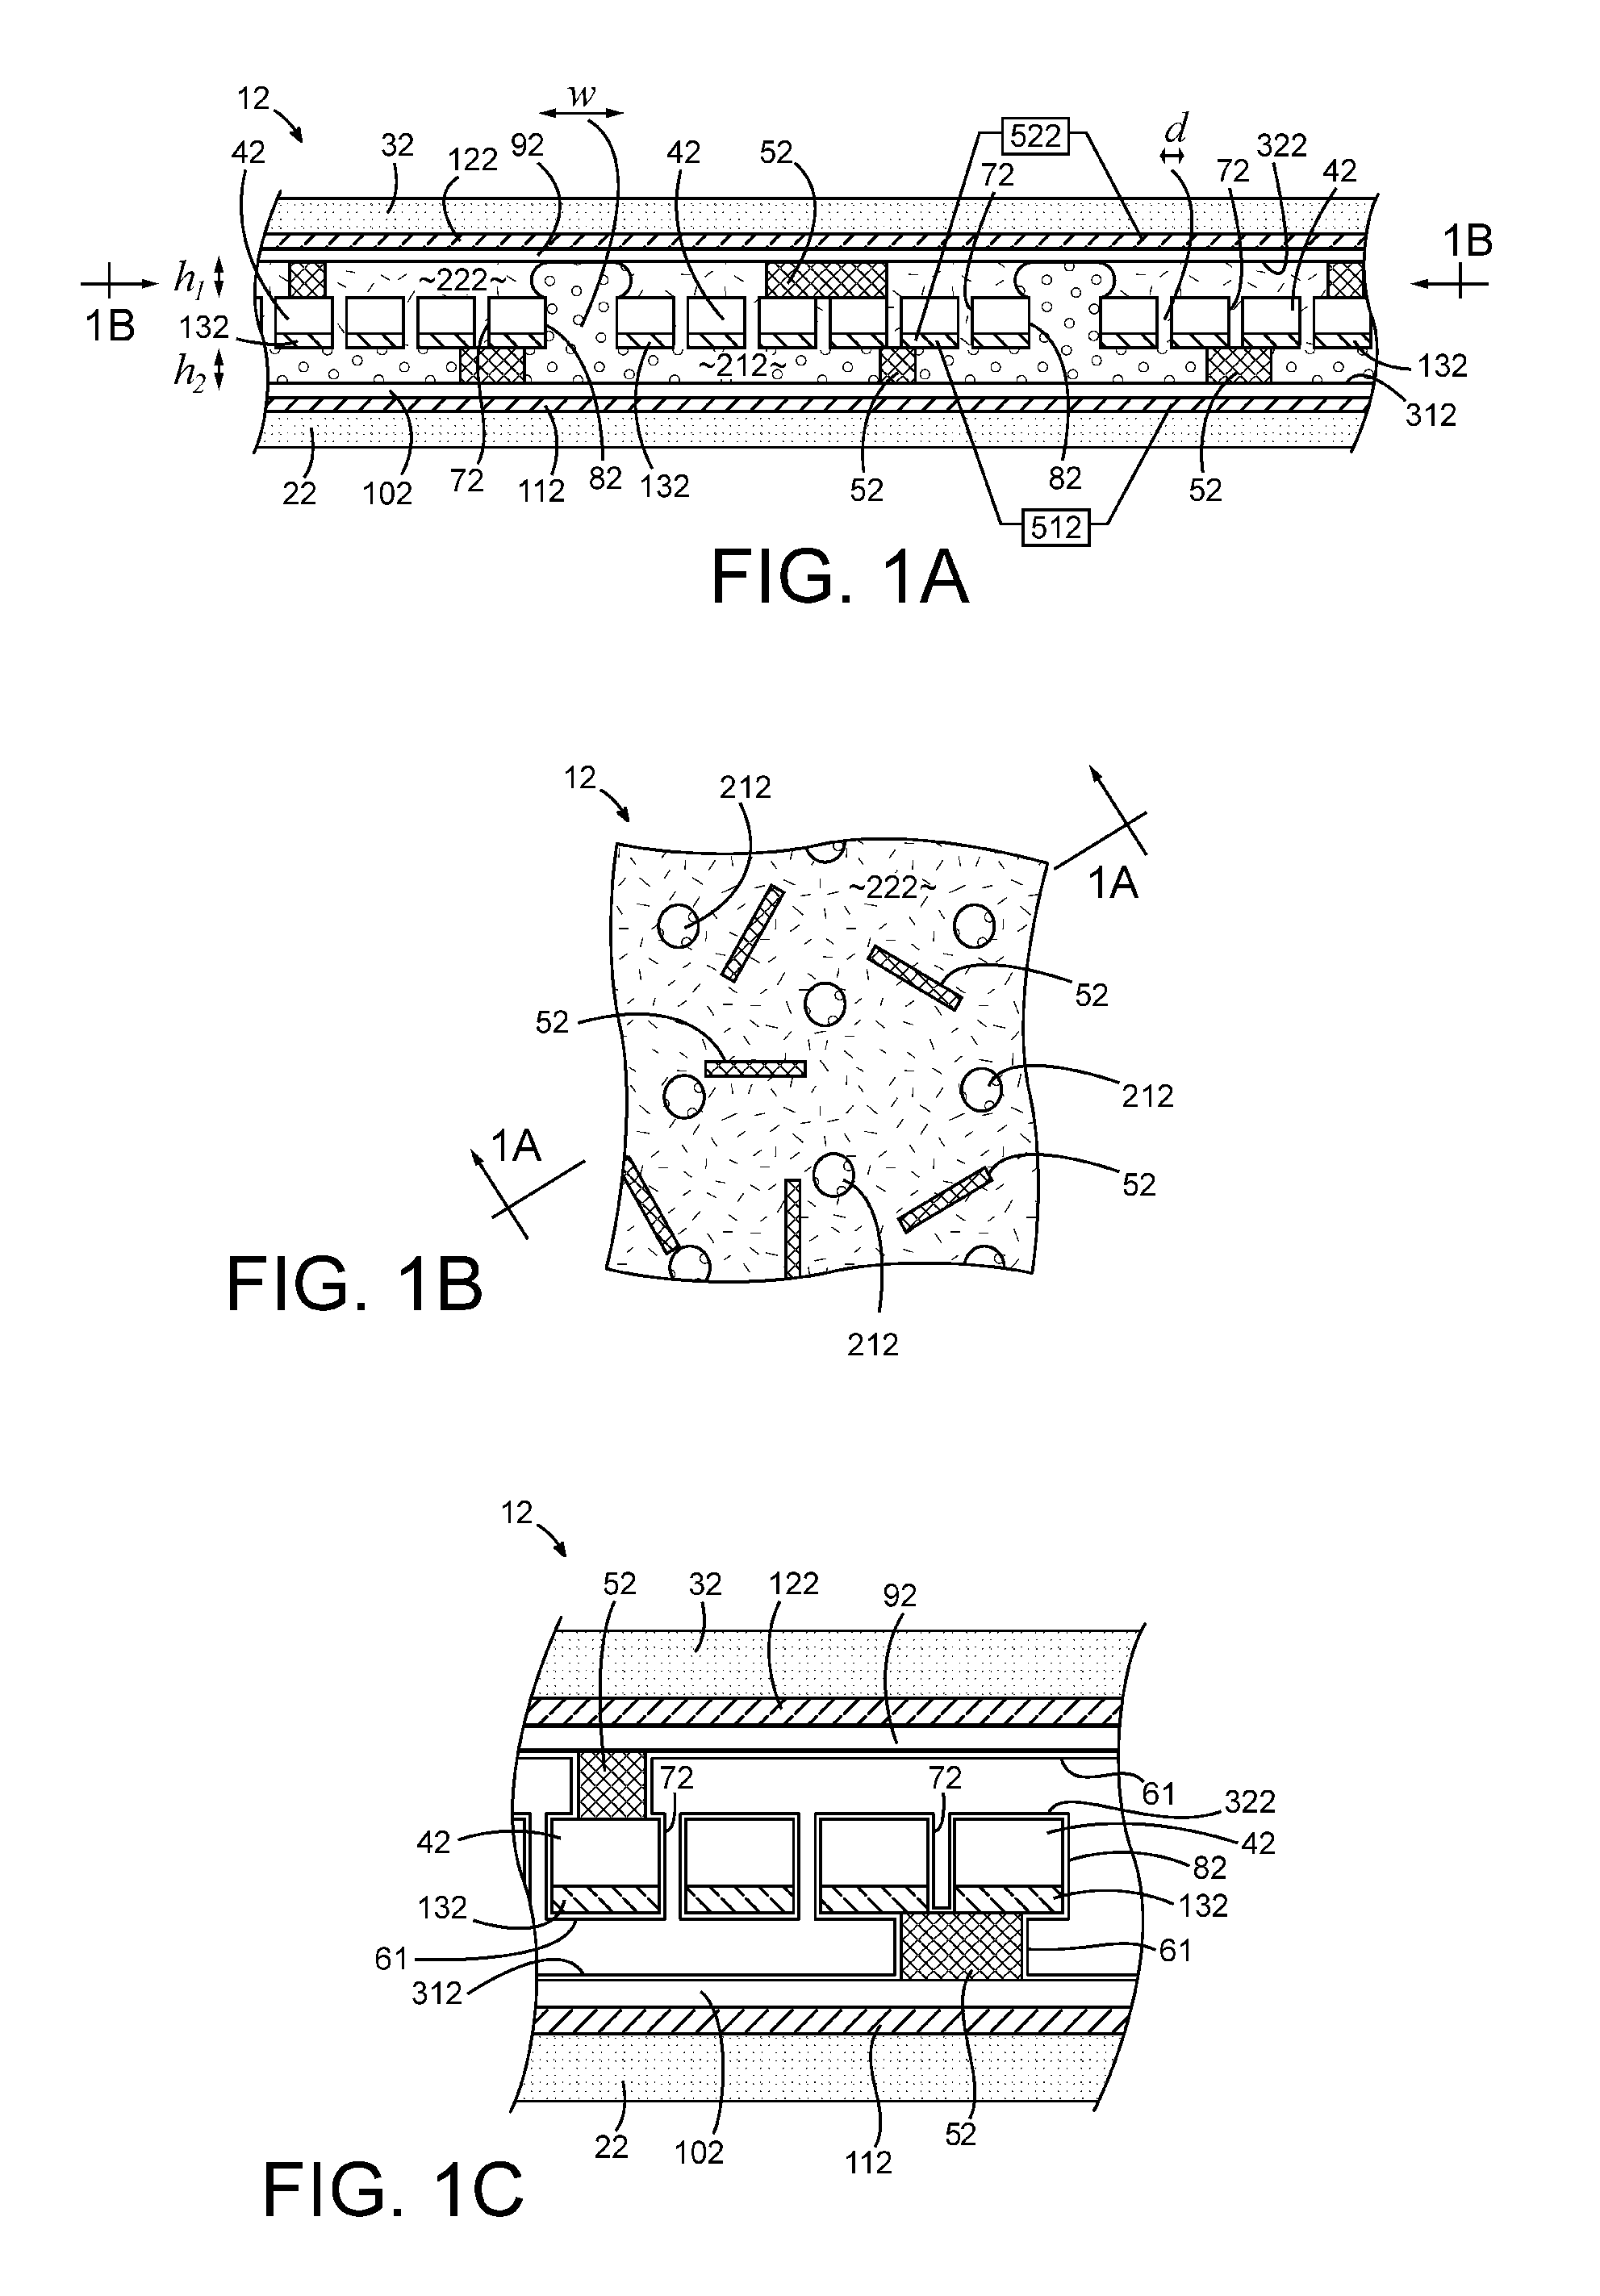 Electrofluidic imaging film, devices, and displays, and methods of making and using the same